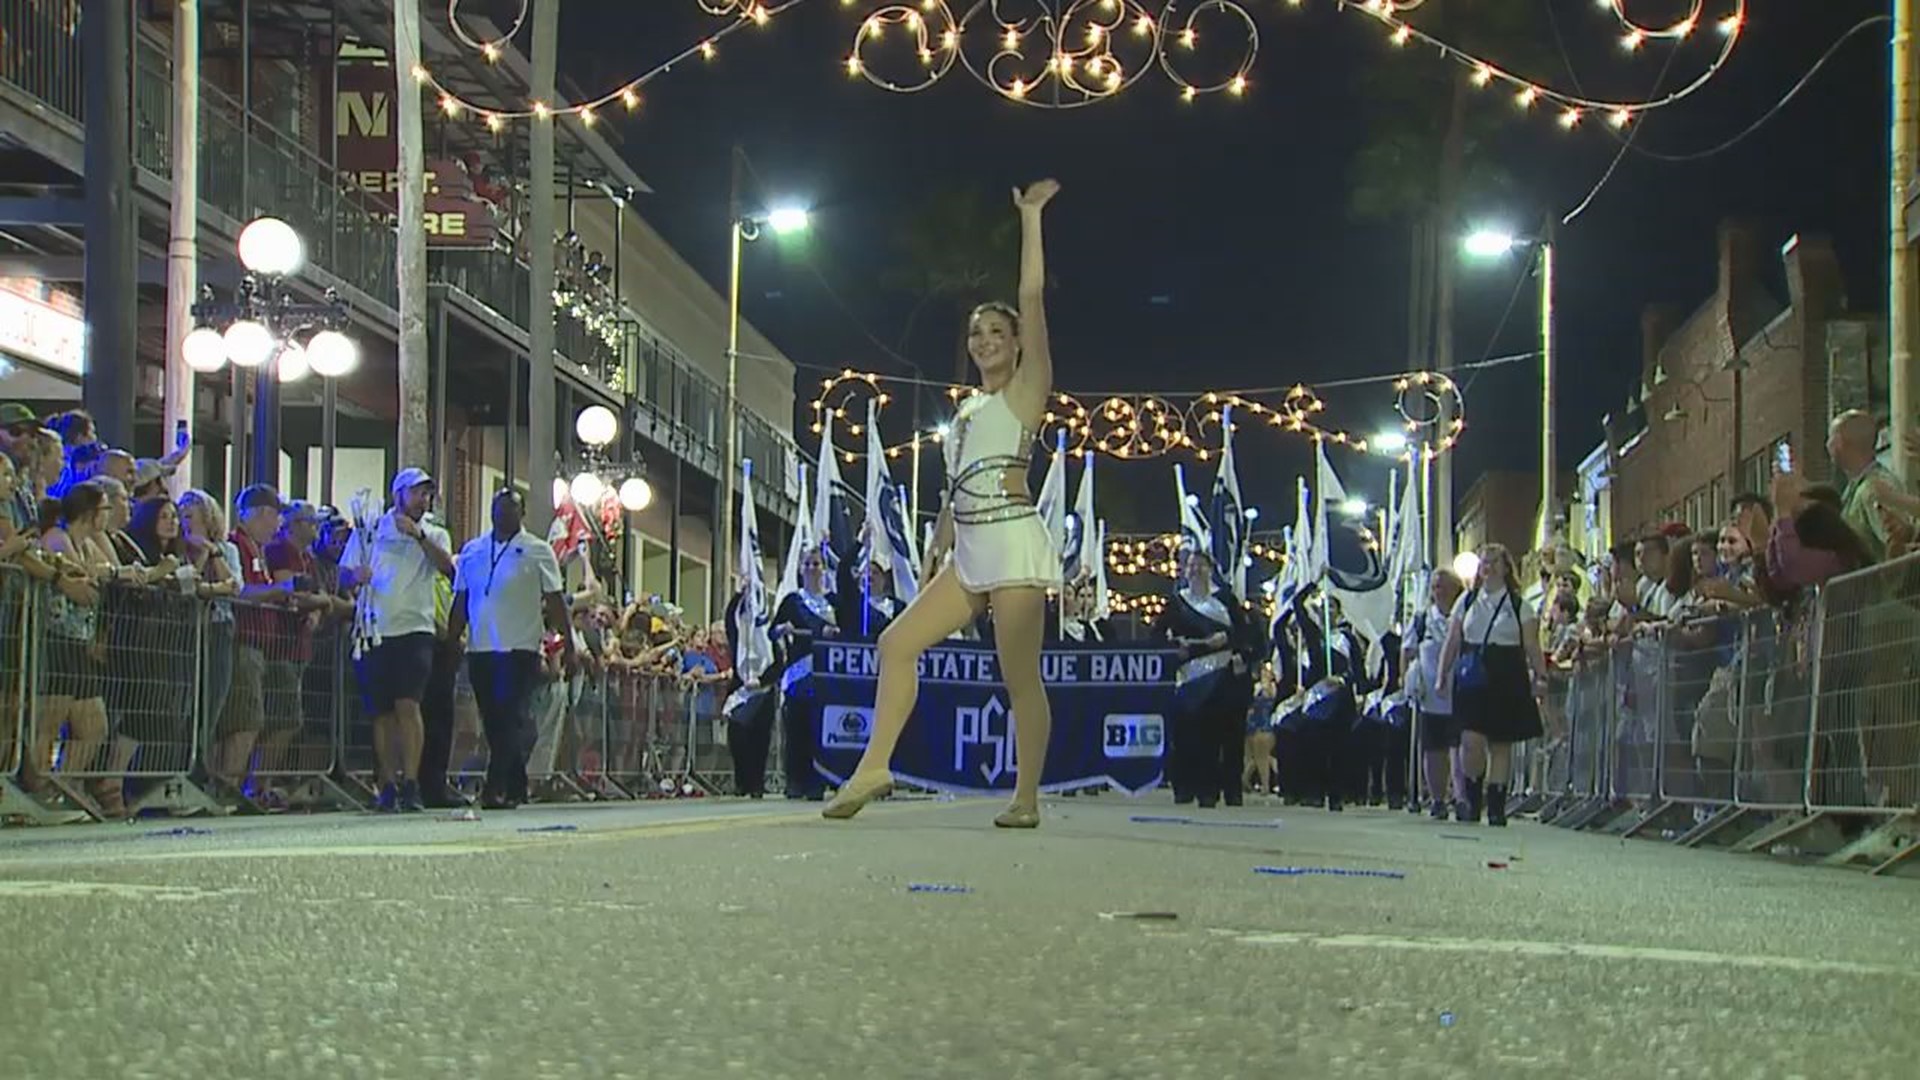 Penn State Fans Enjoy Battle of the Bands, Parade Ahead of Outback Bowl